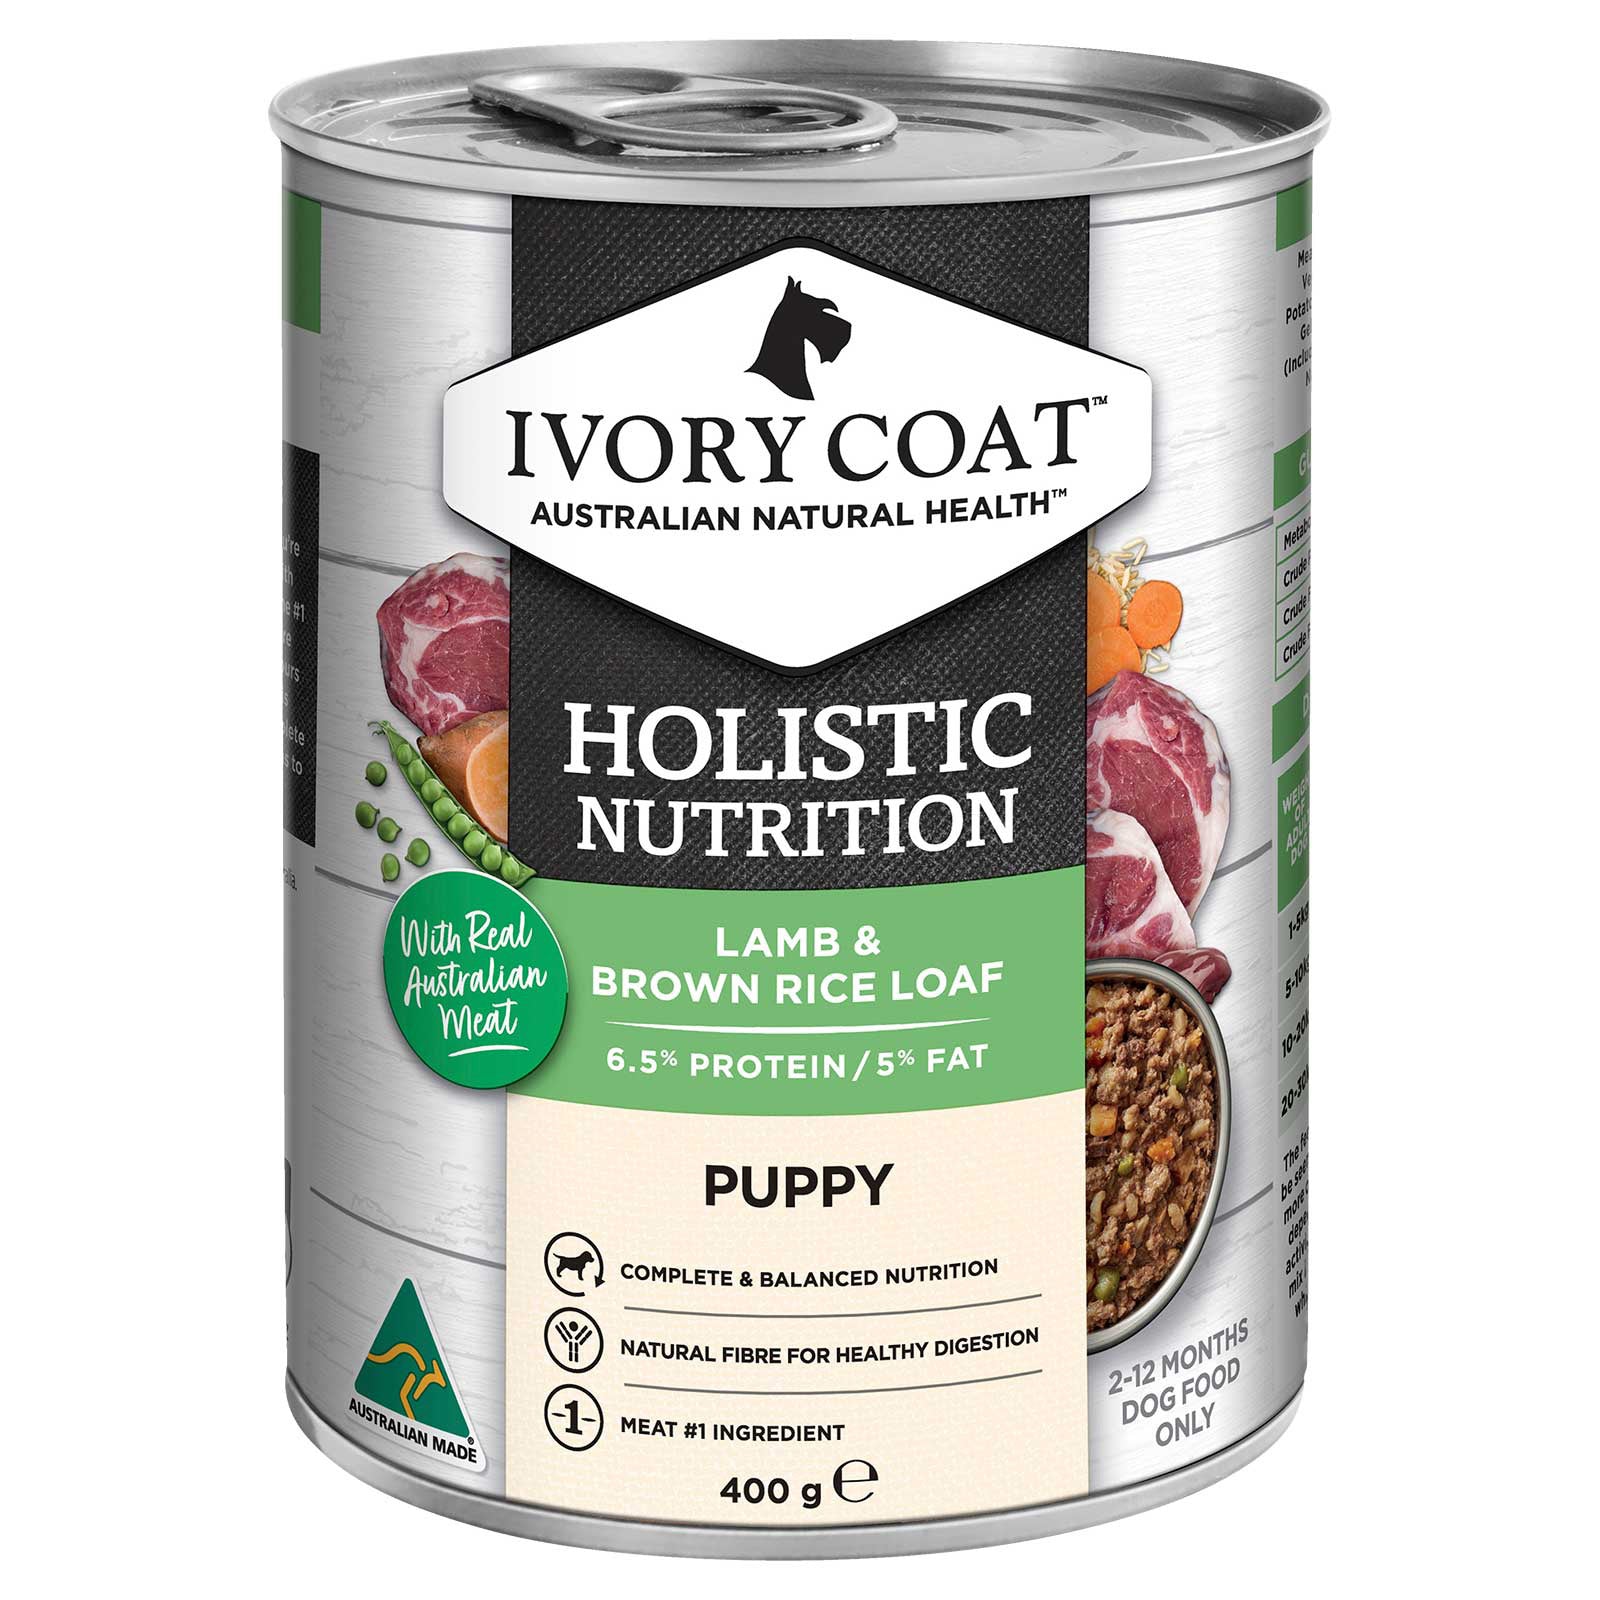 Ivory Coat Dog Food Can Puppy Lamb & Brown Rice Loaf